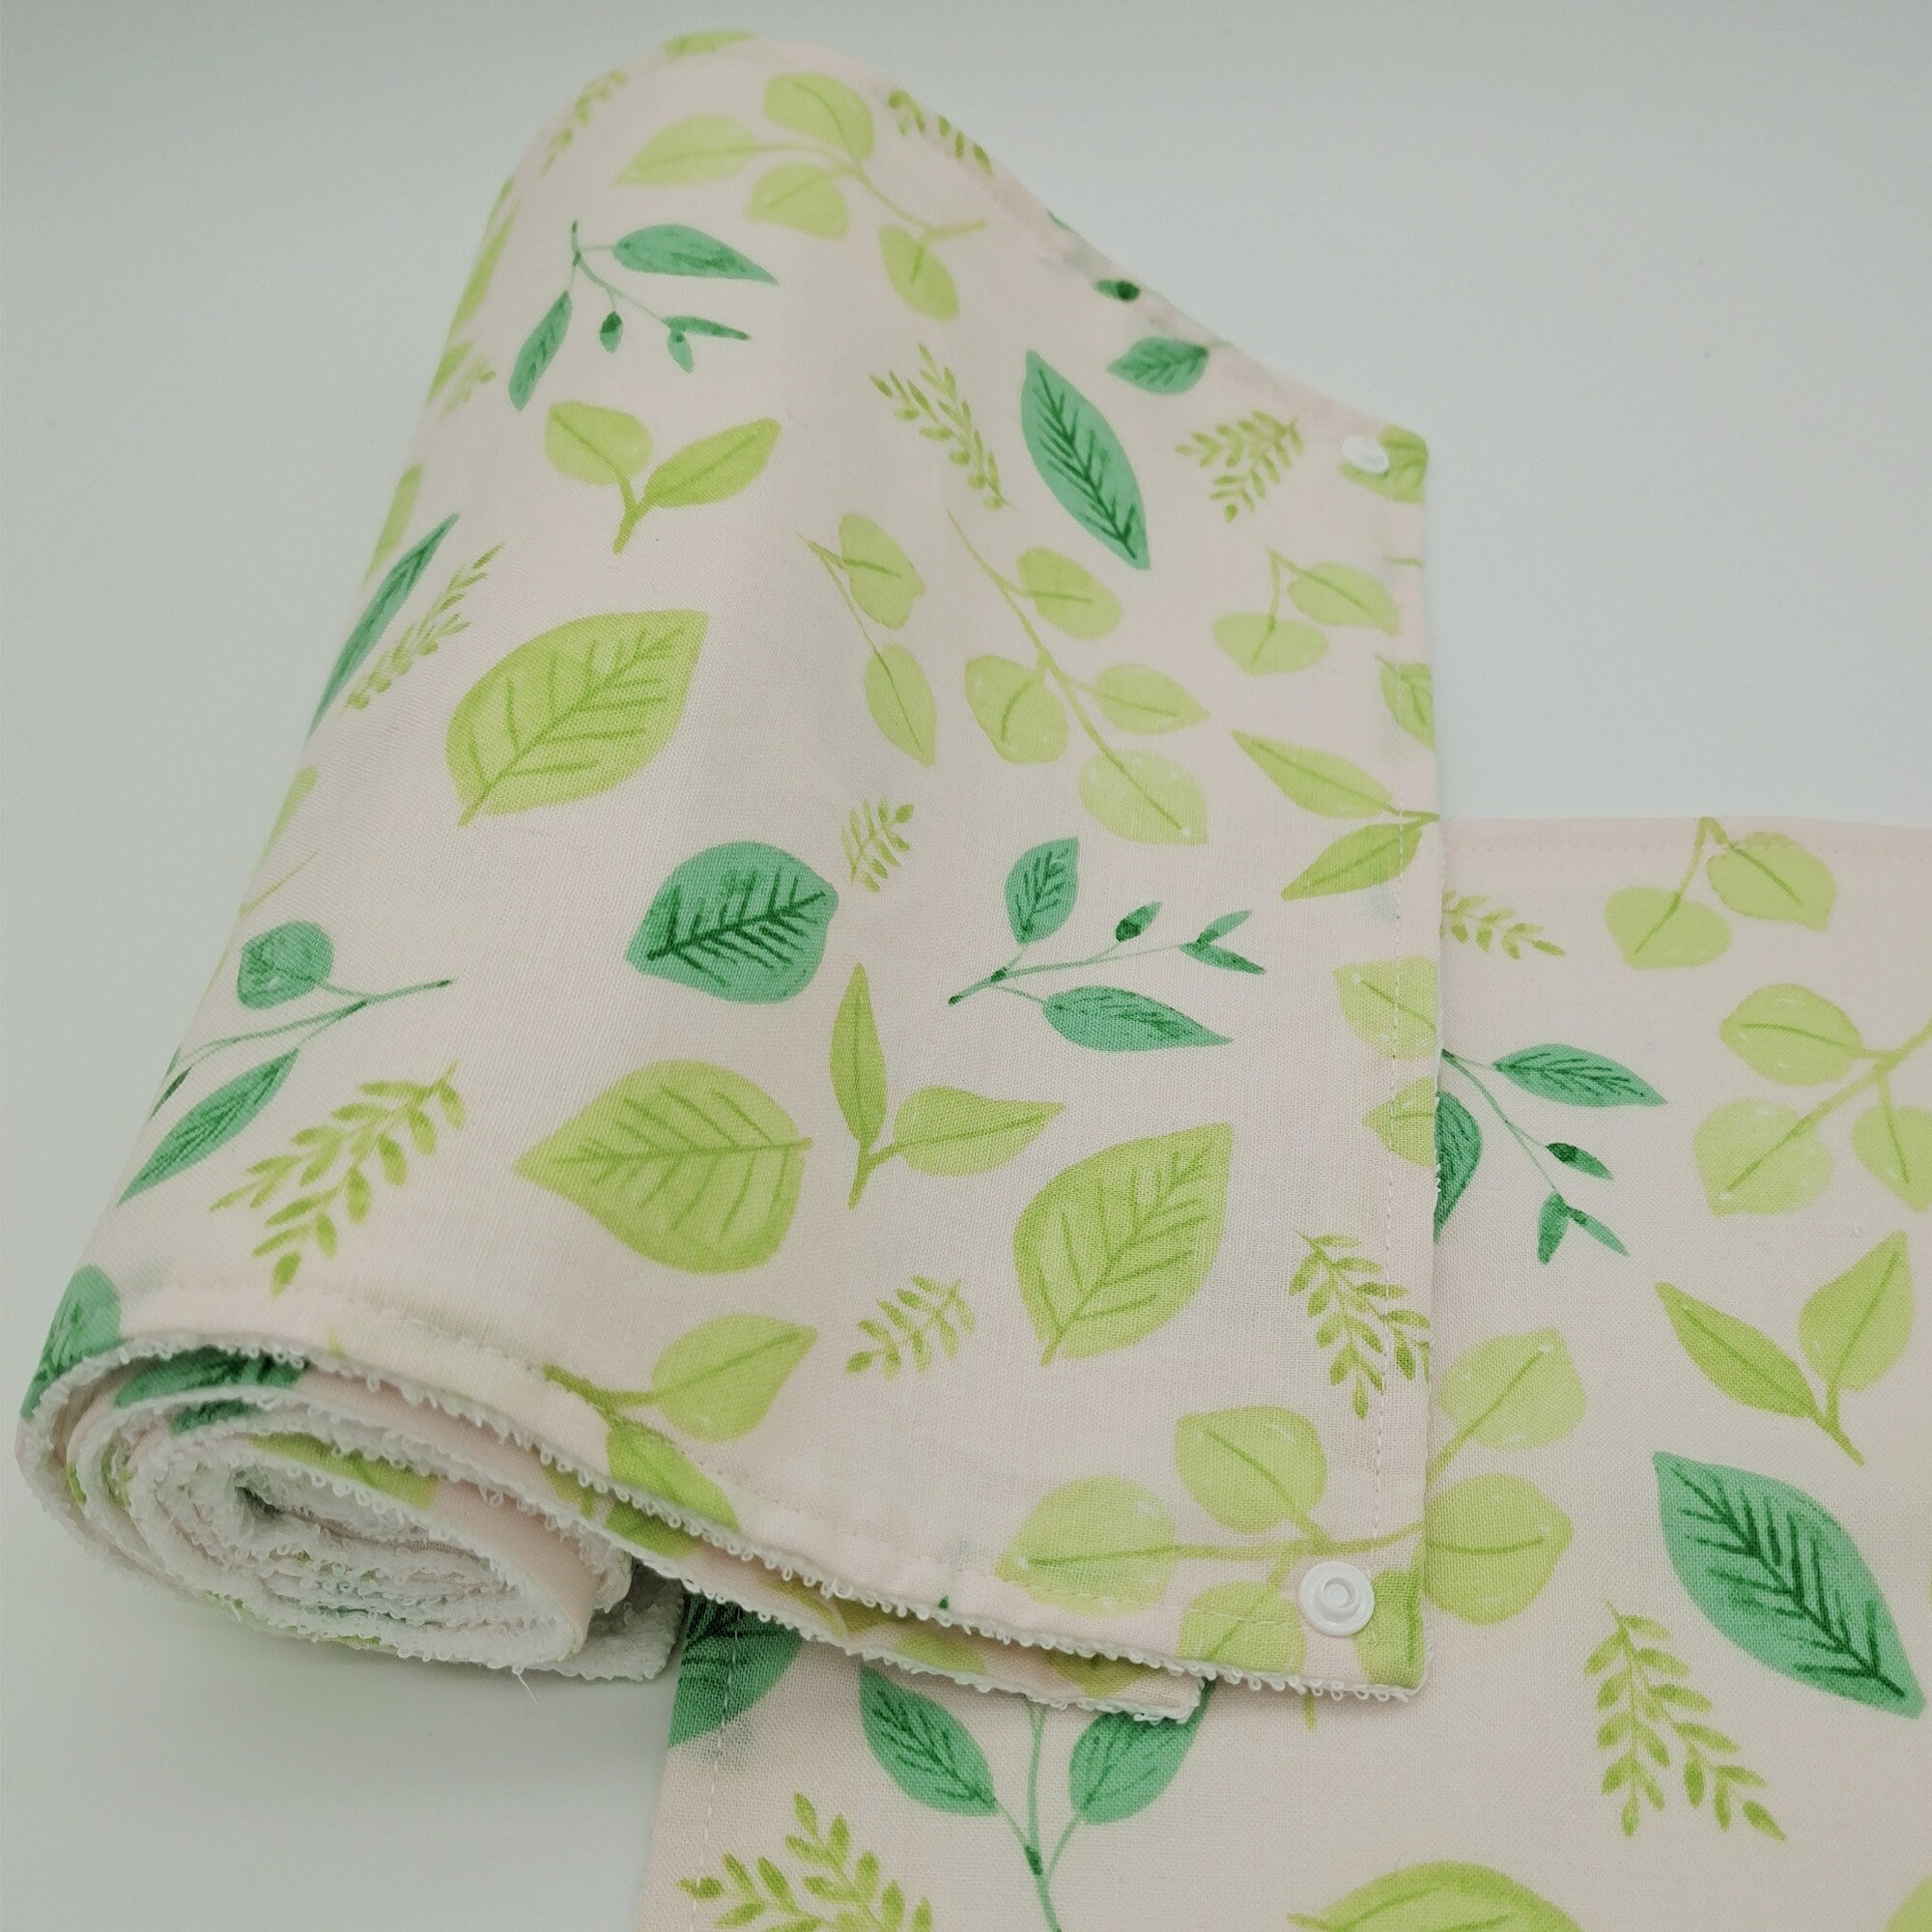 Paperless Kitchen Towels, Paperless Kitchen, Reusable paper towels roll with snaps washable, eco-friendly — Botanical Leaf Collection